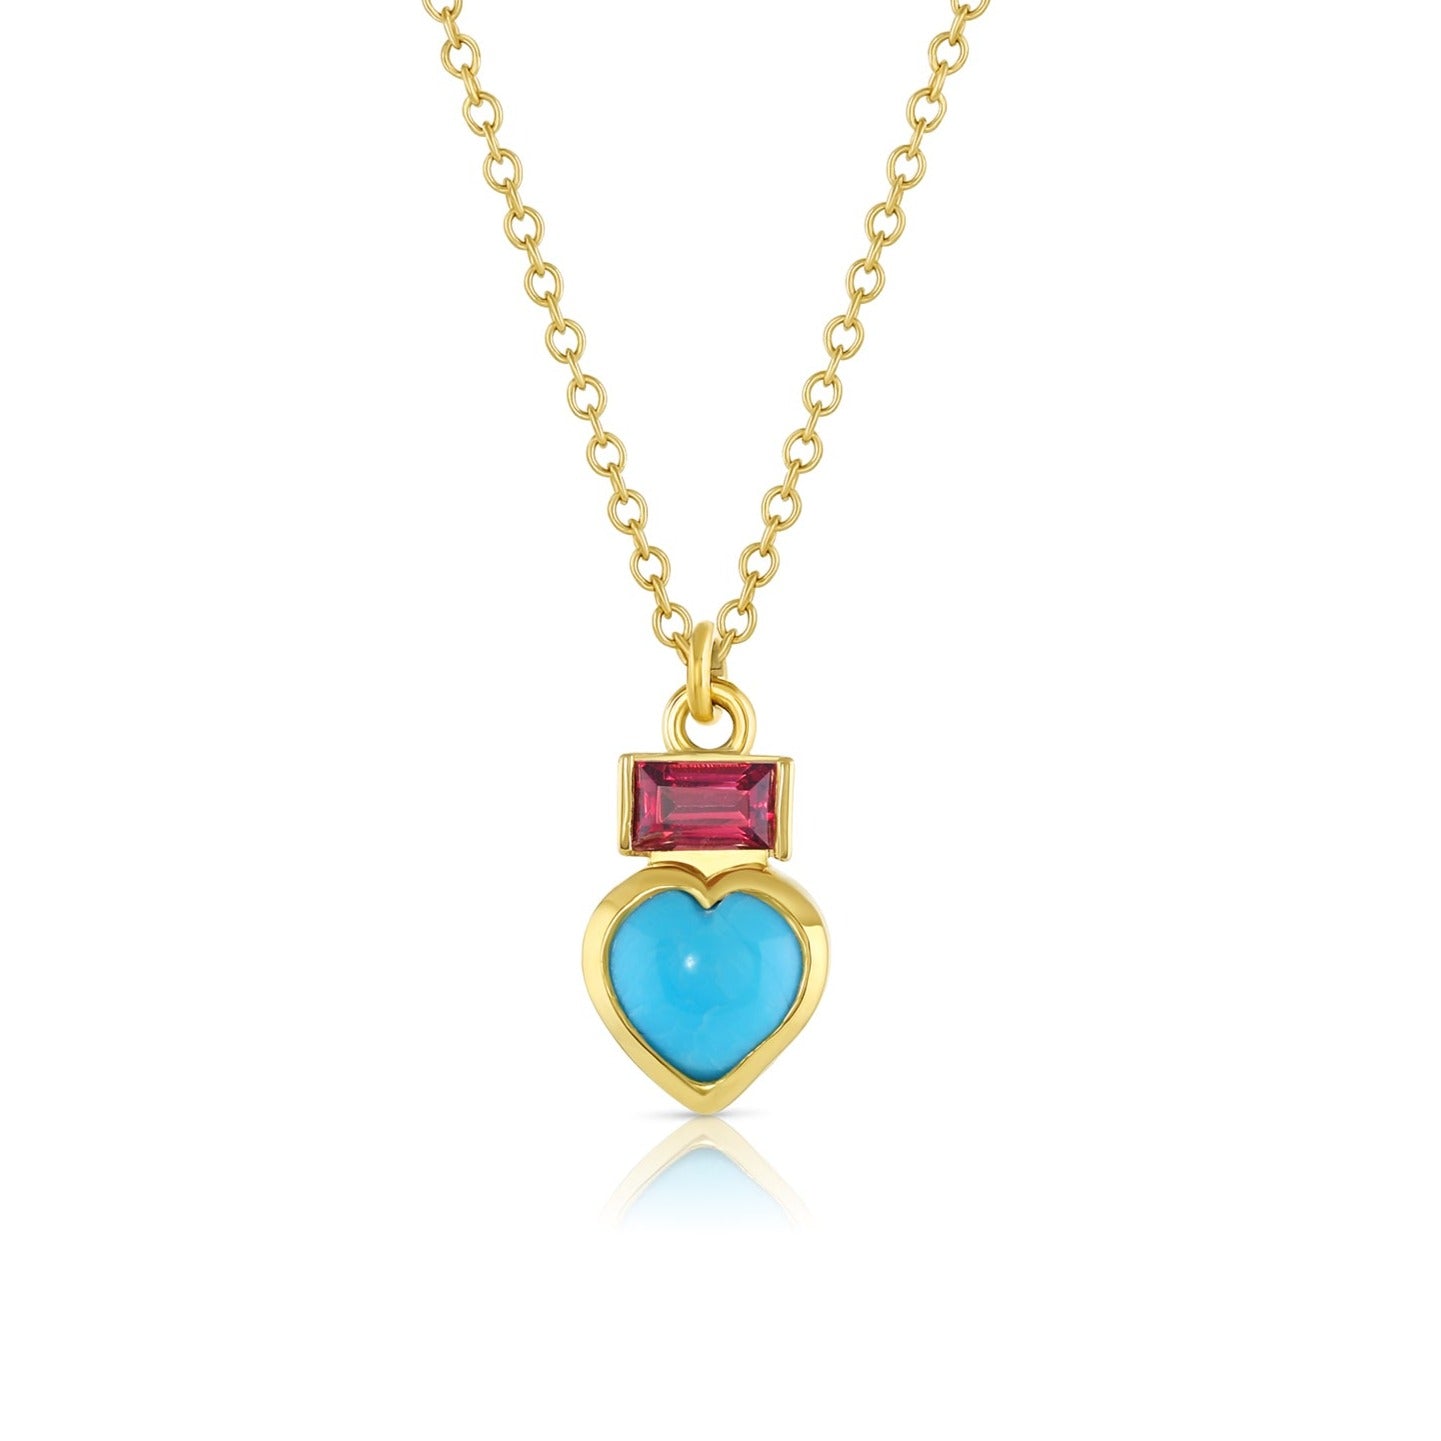 Load image into Gallery viewer, 18k yellow gold pendant necklace with heart shaped turquoise and rectangle shaped rhodolite garnet gemstones.
